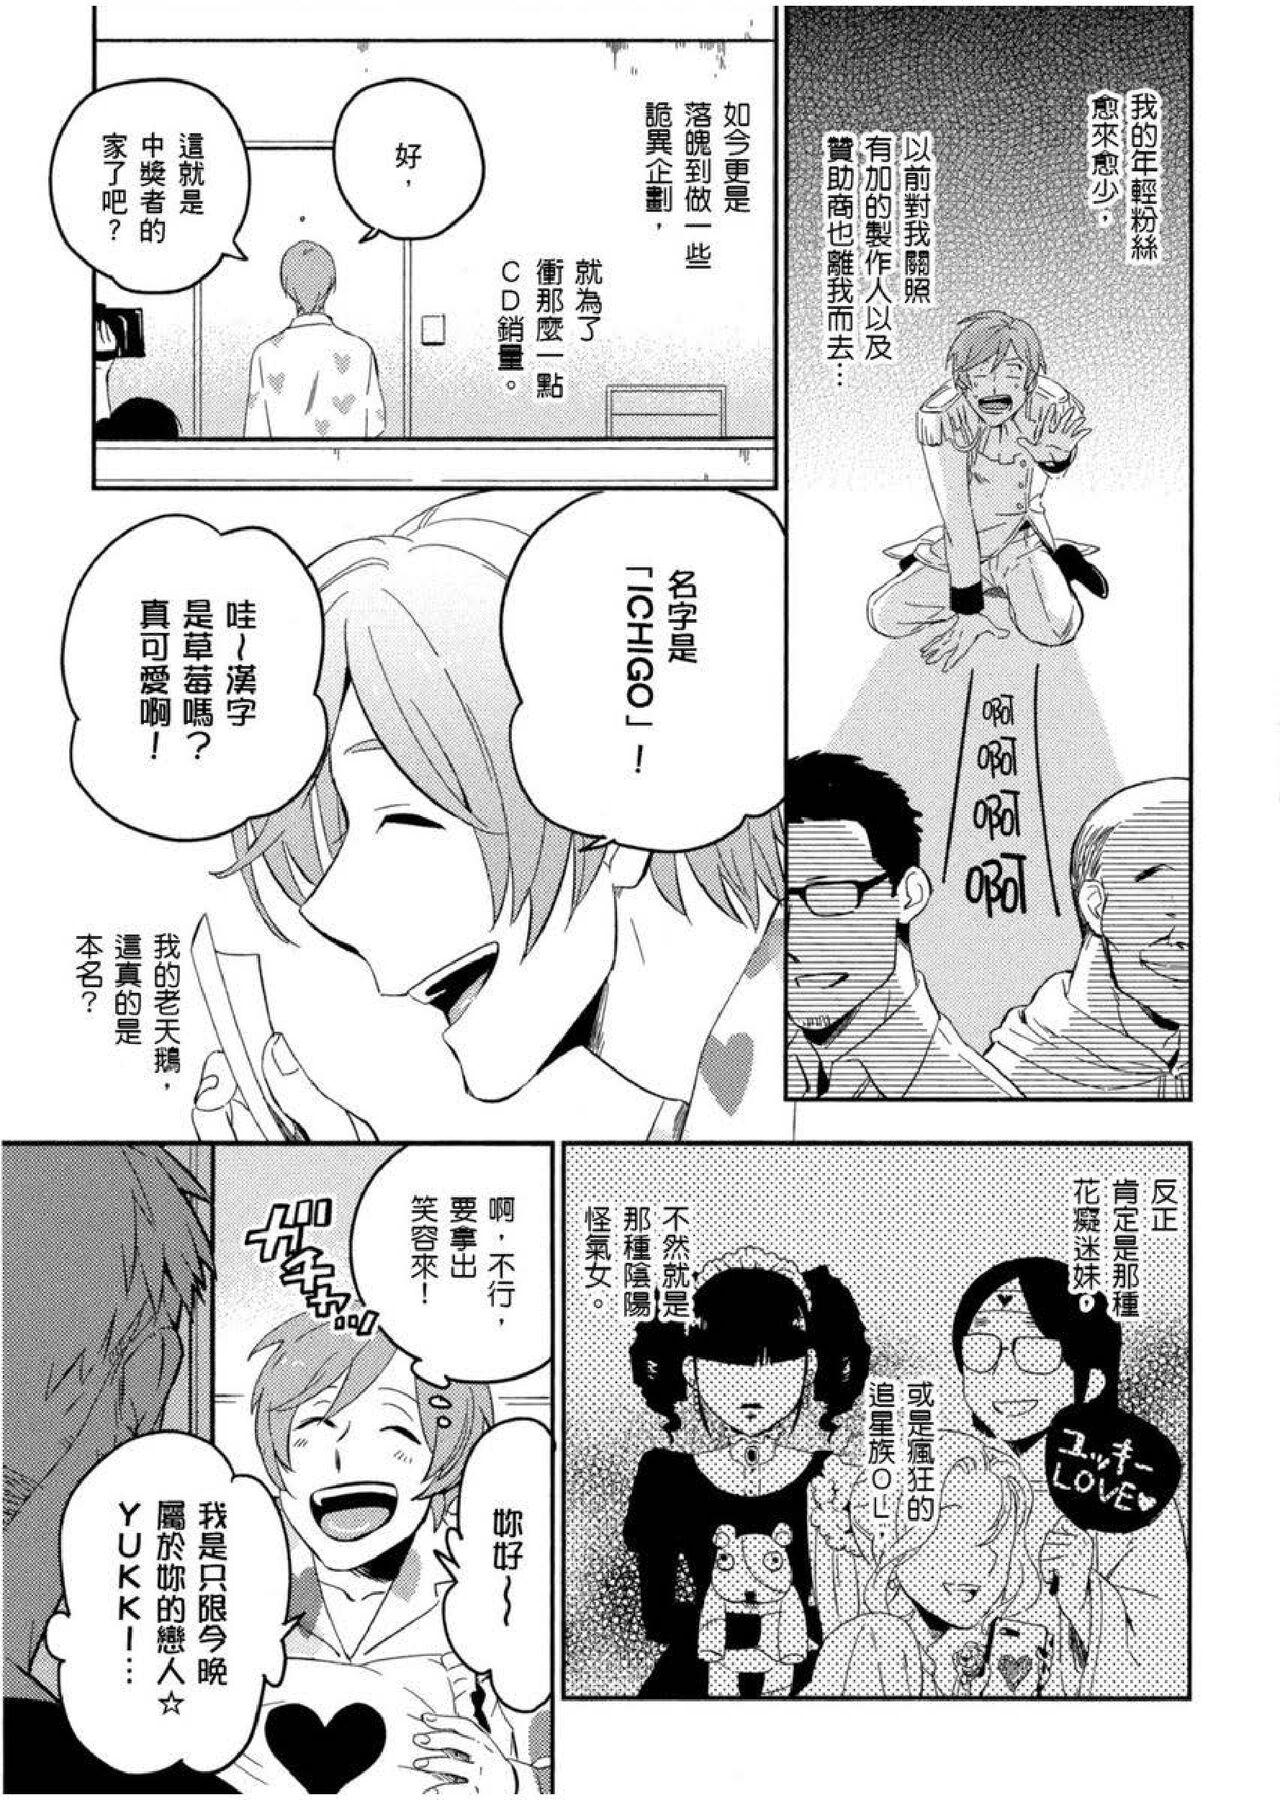 Rebolando Soine Lovers | 陪睡Lovers Cei - Page 8